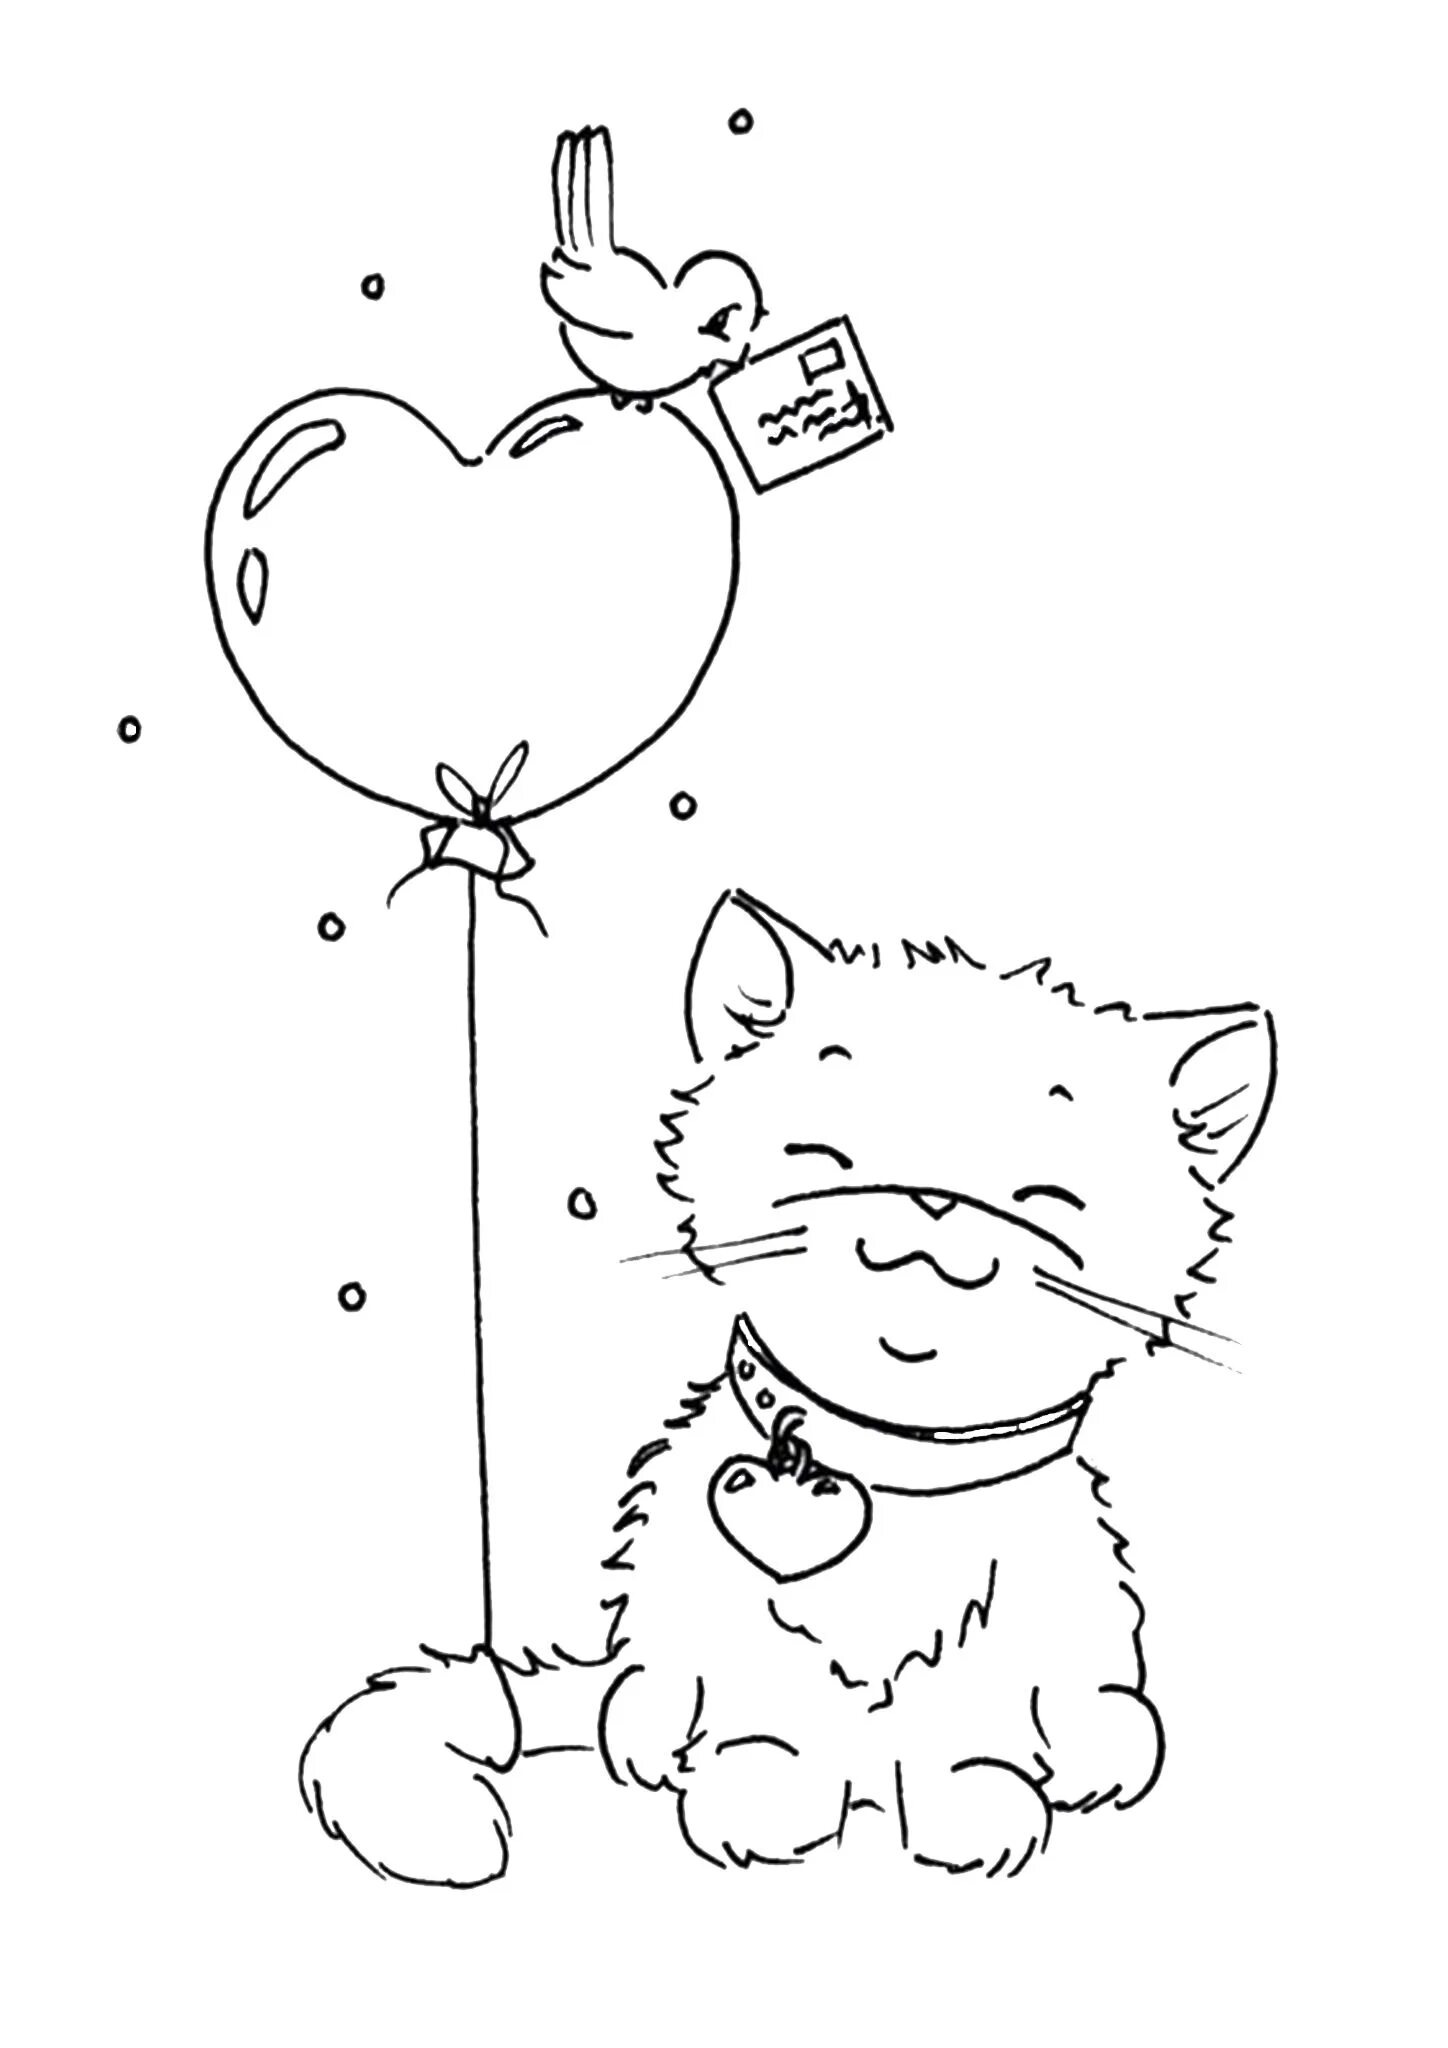 Cat with balloons #9